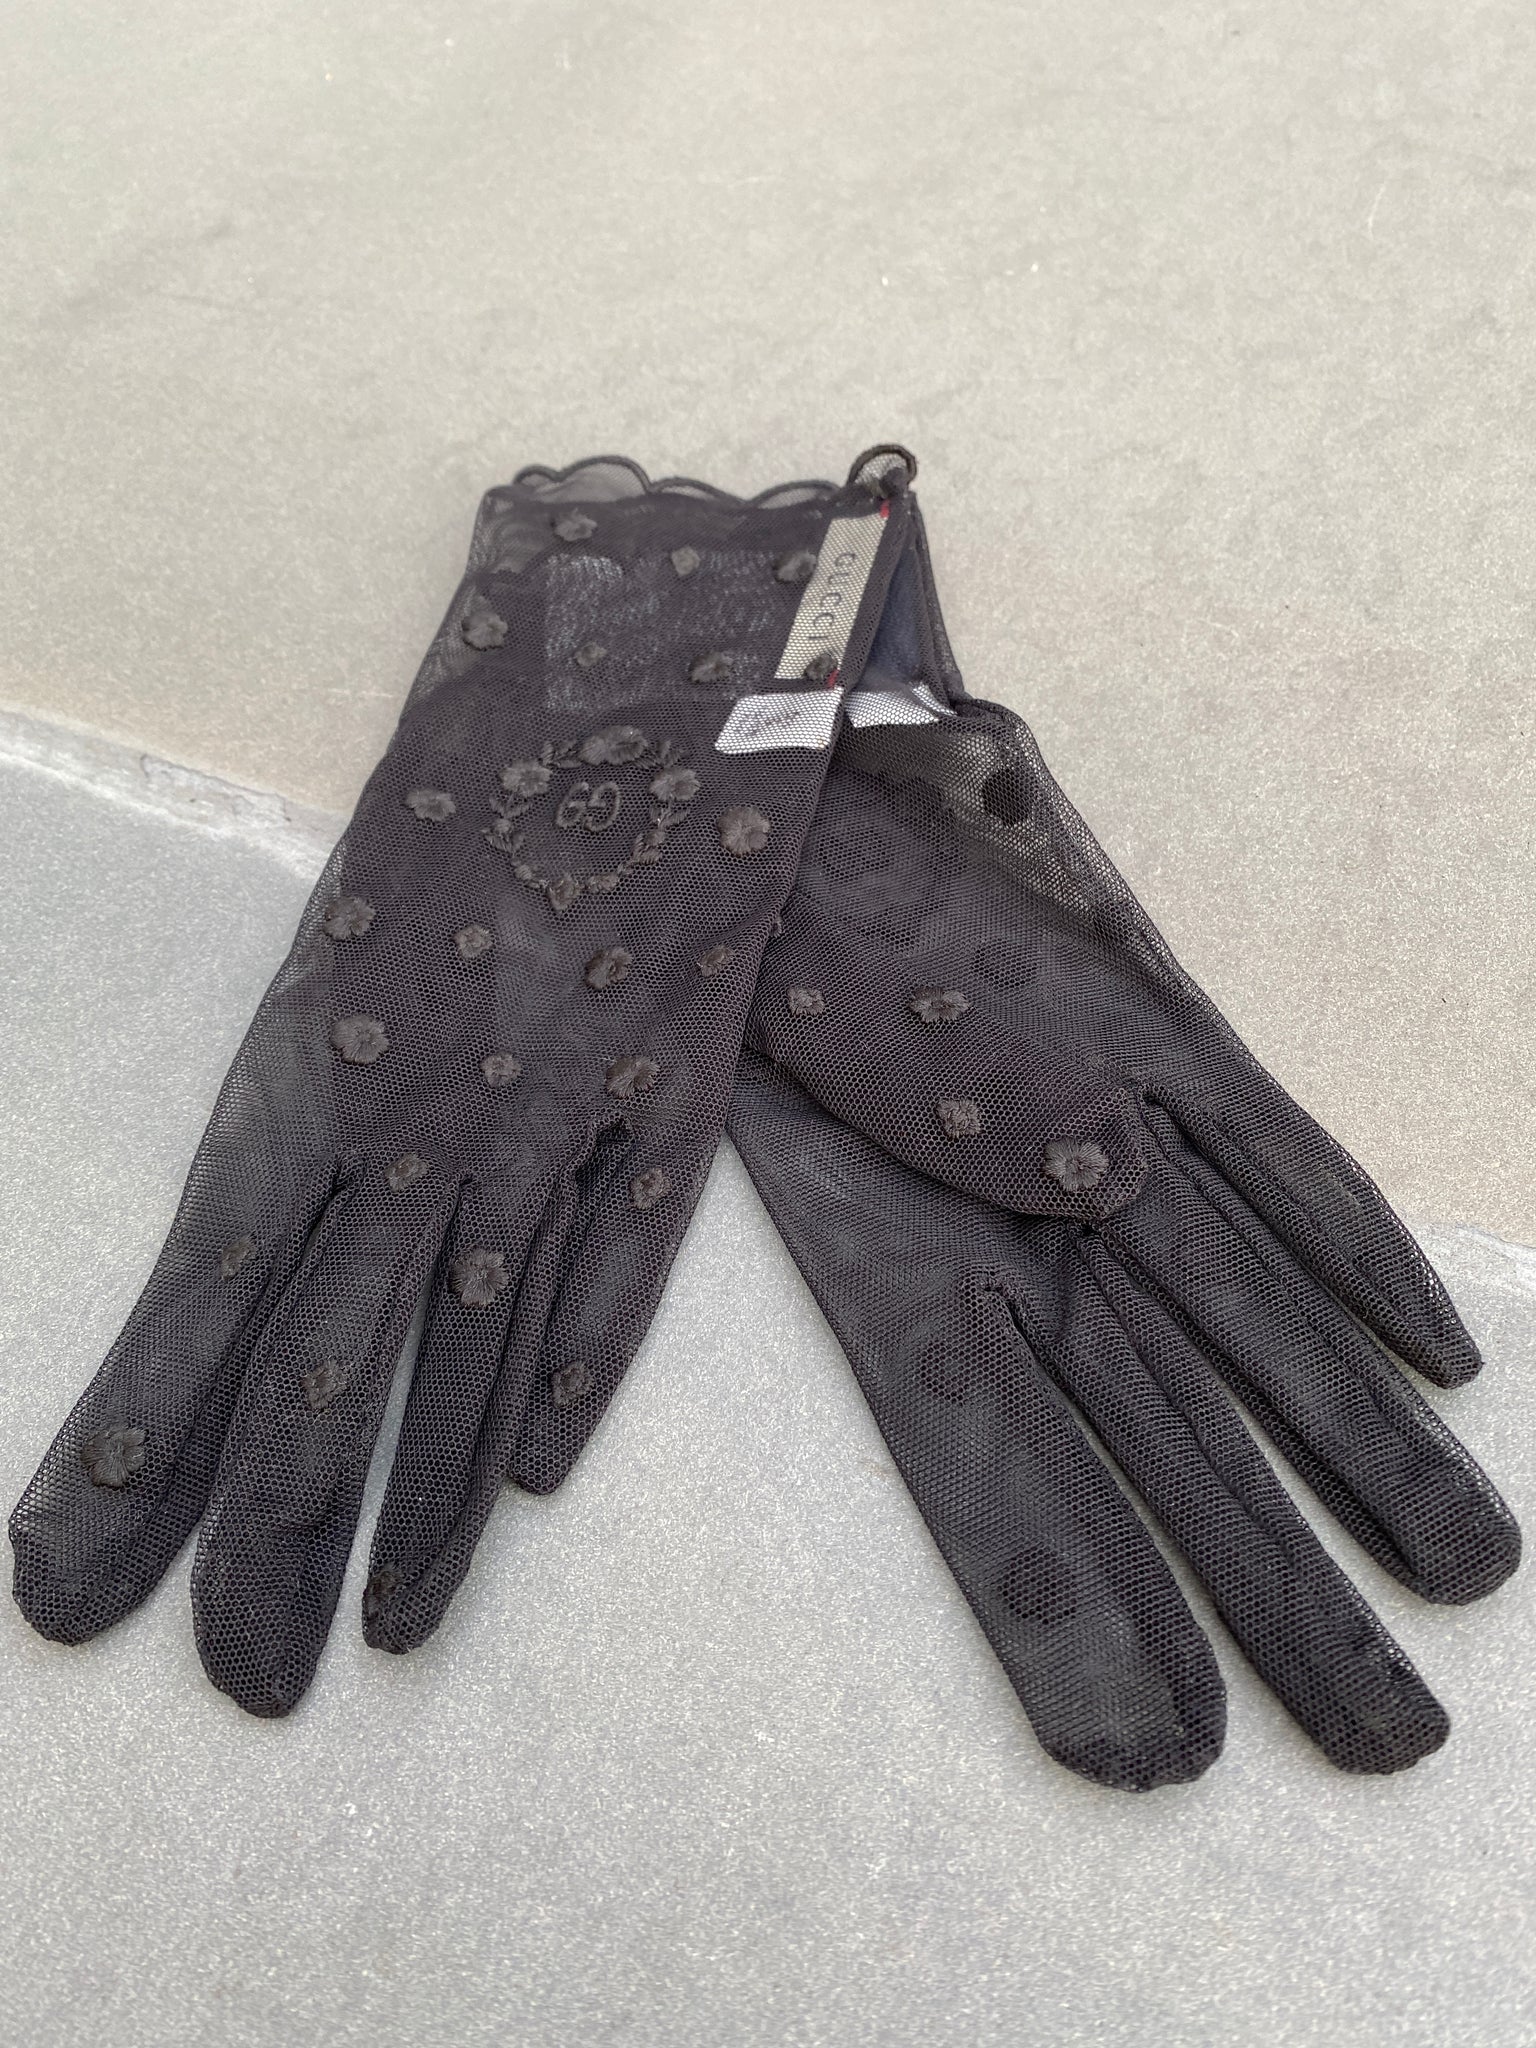 Preowned Authentic Gucci Embroidered Tulle Gloves